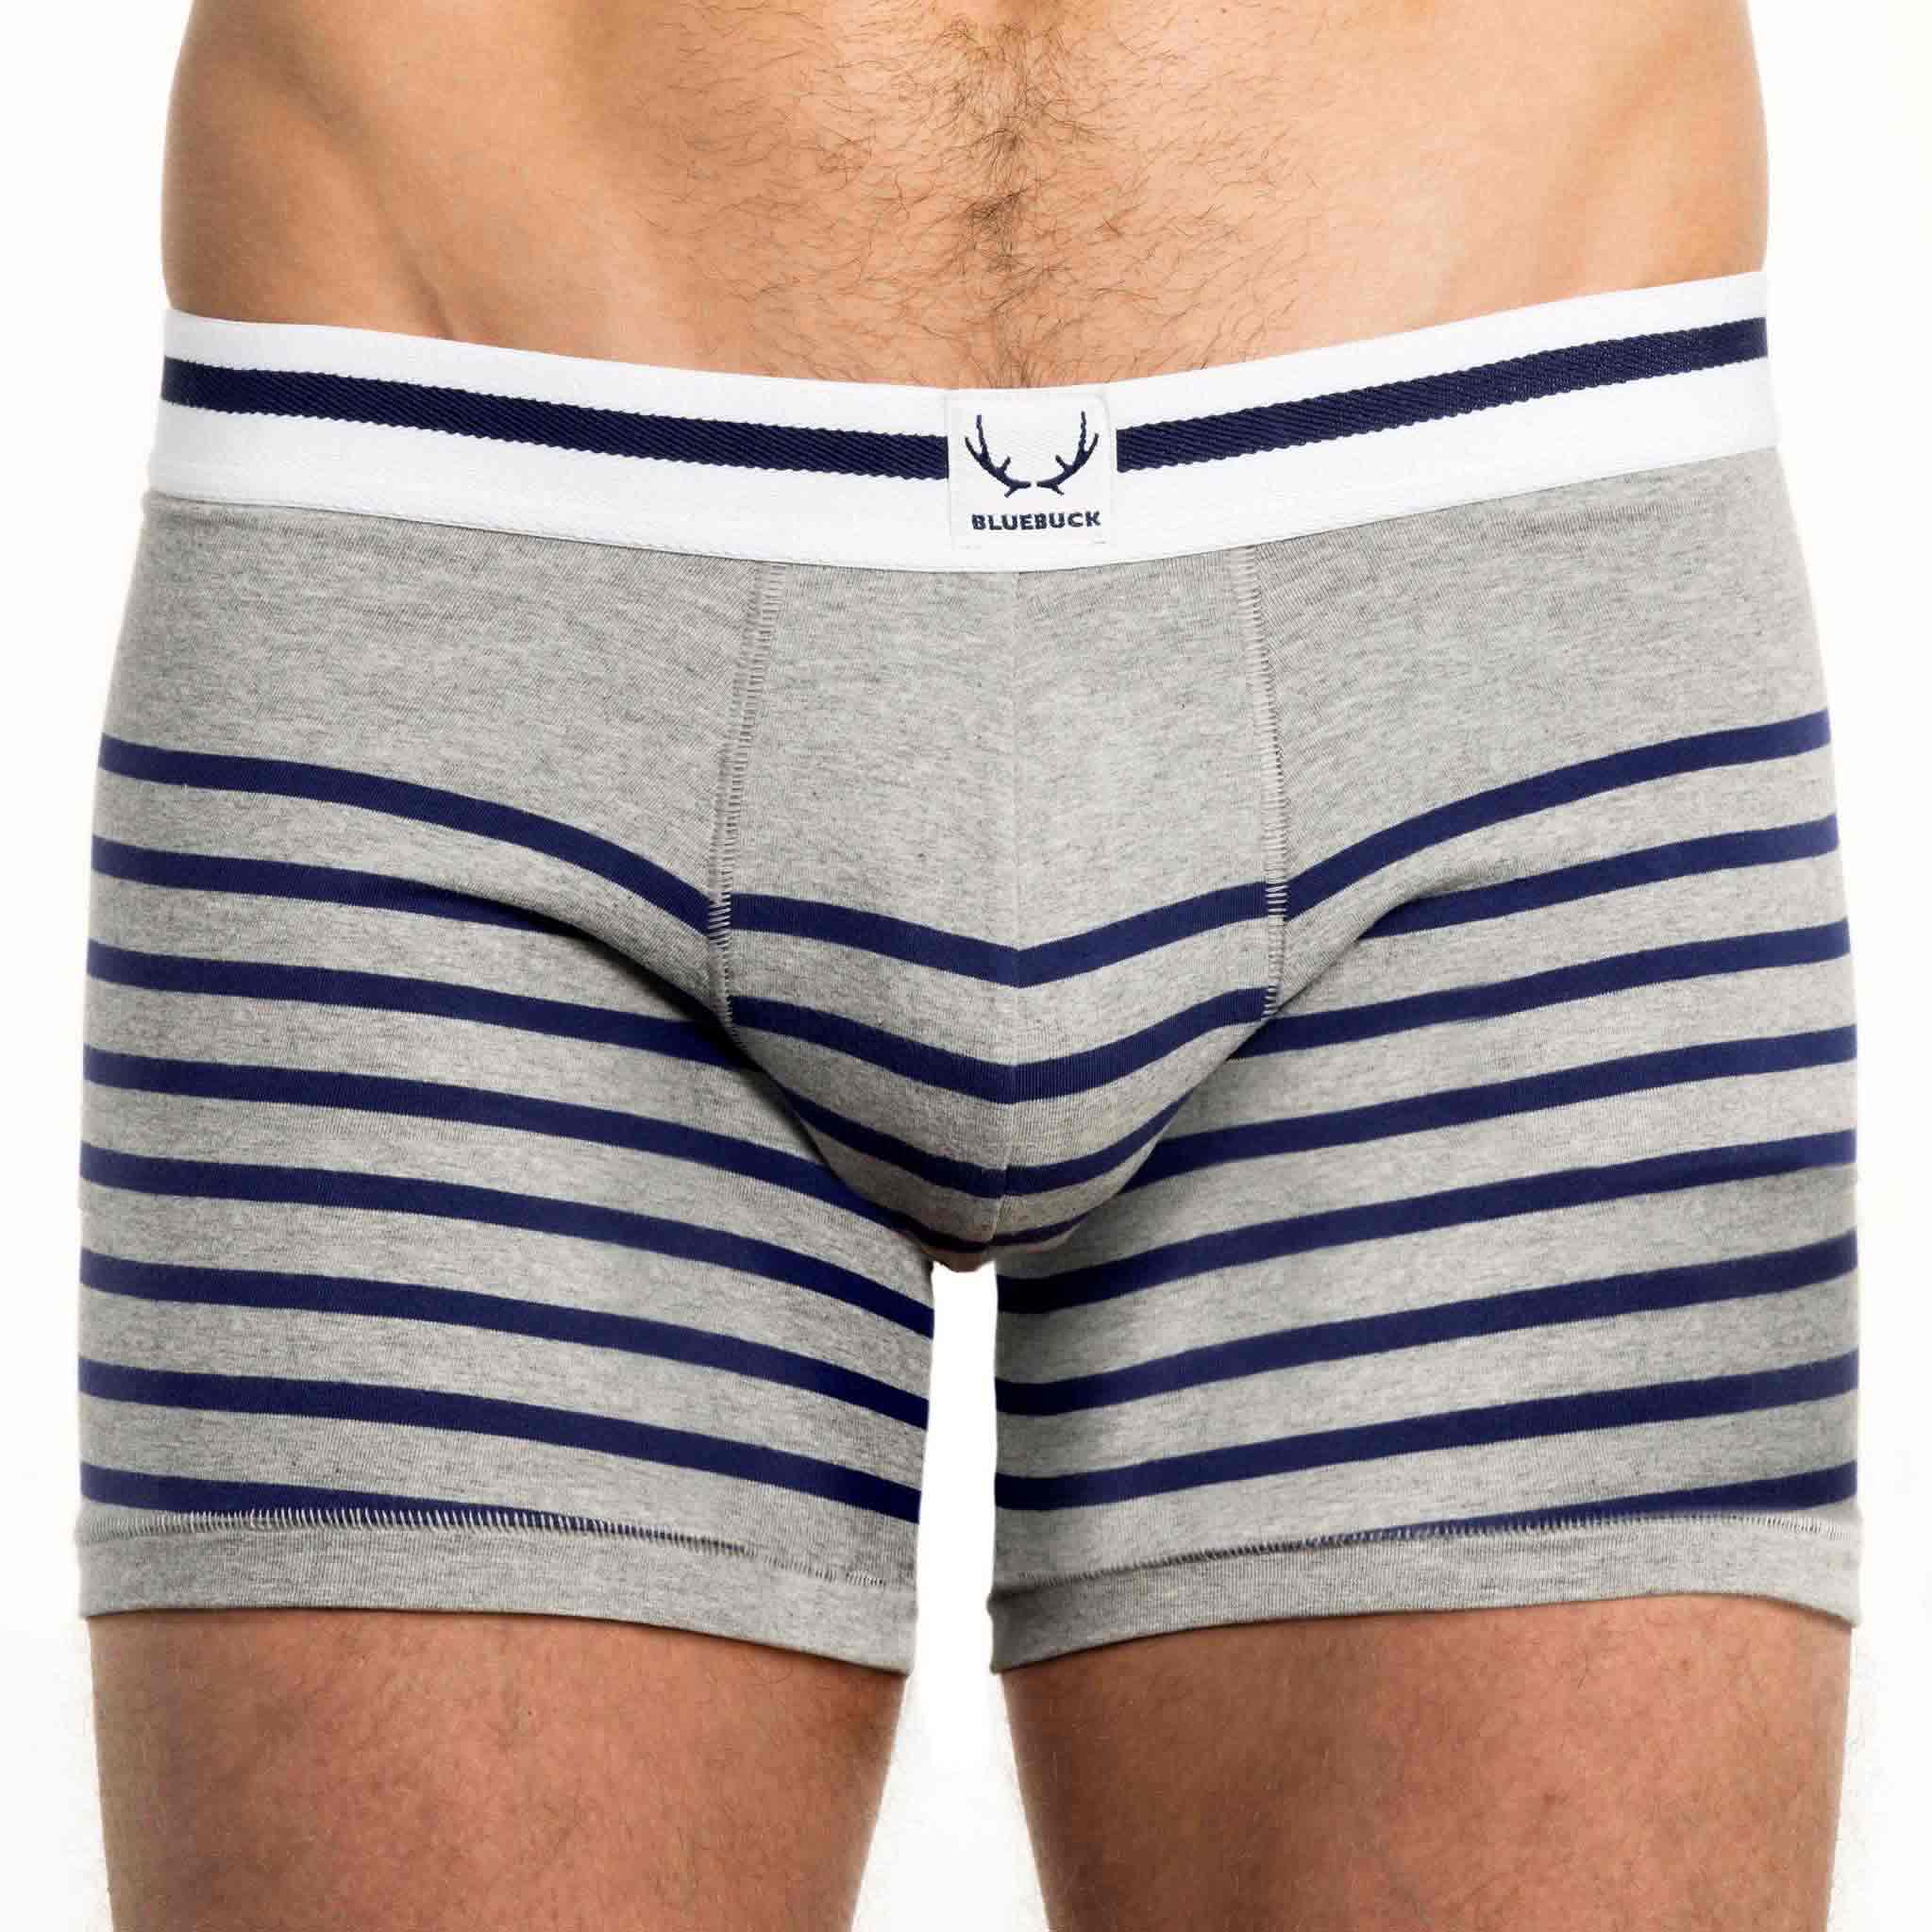 Gray and blue striped, long boxer shorts made of organic cotton from Bluebuck